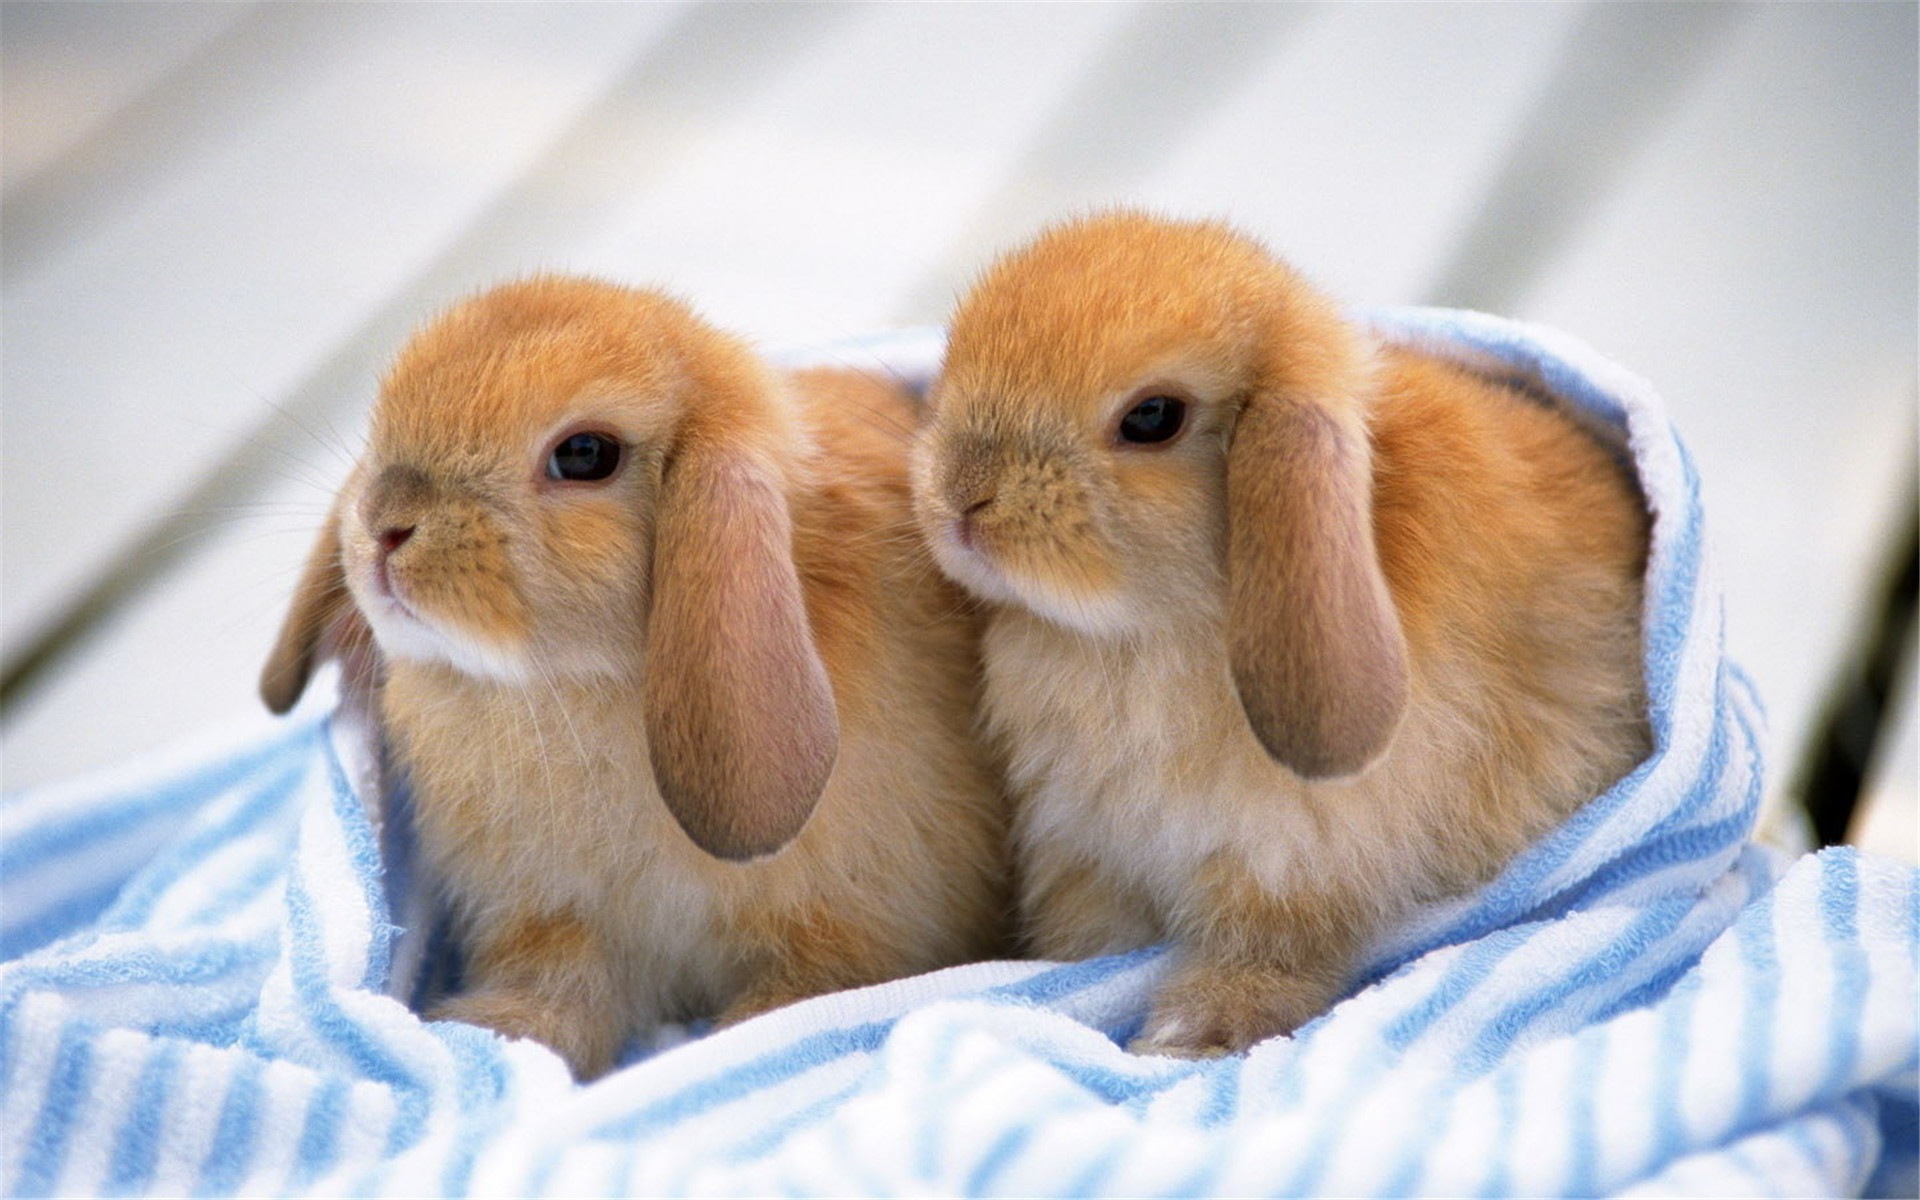 Furry animals, cute bunny HD wallpapers #11 - 1920x1200